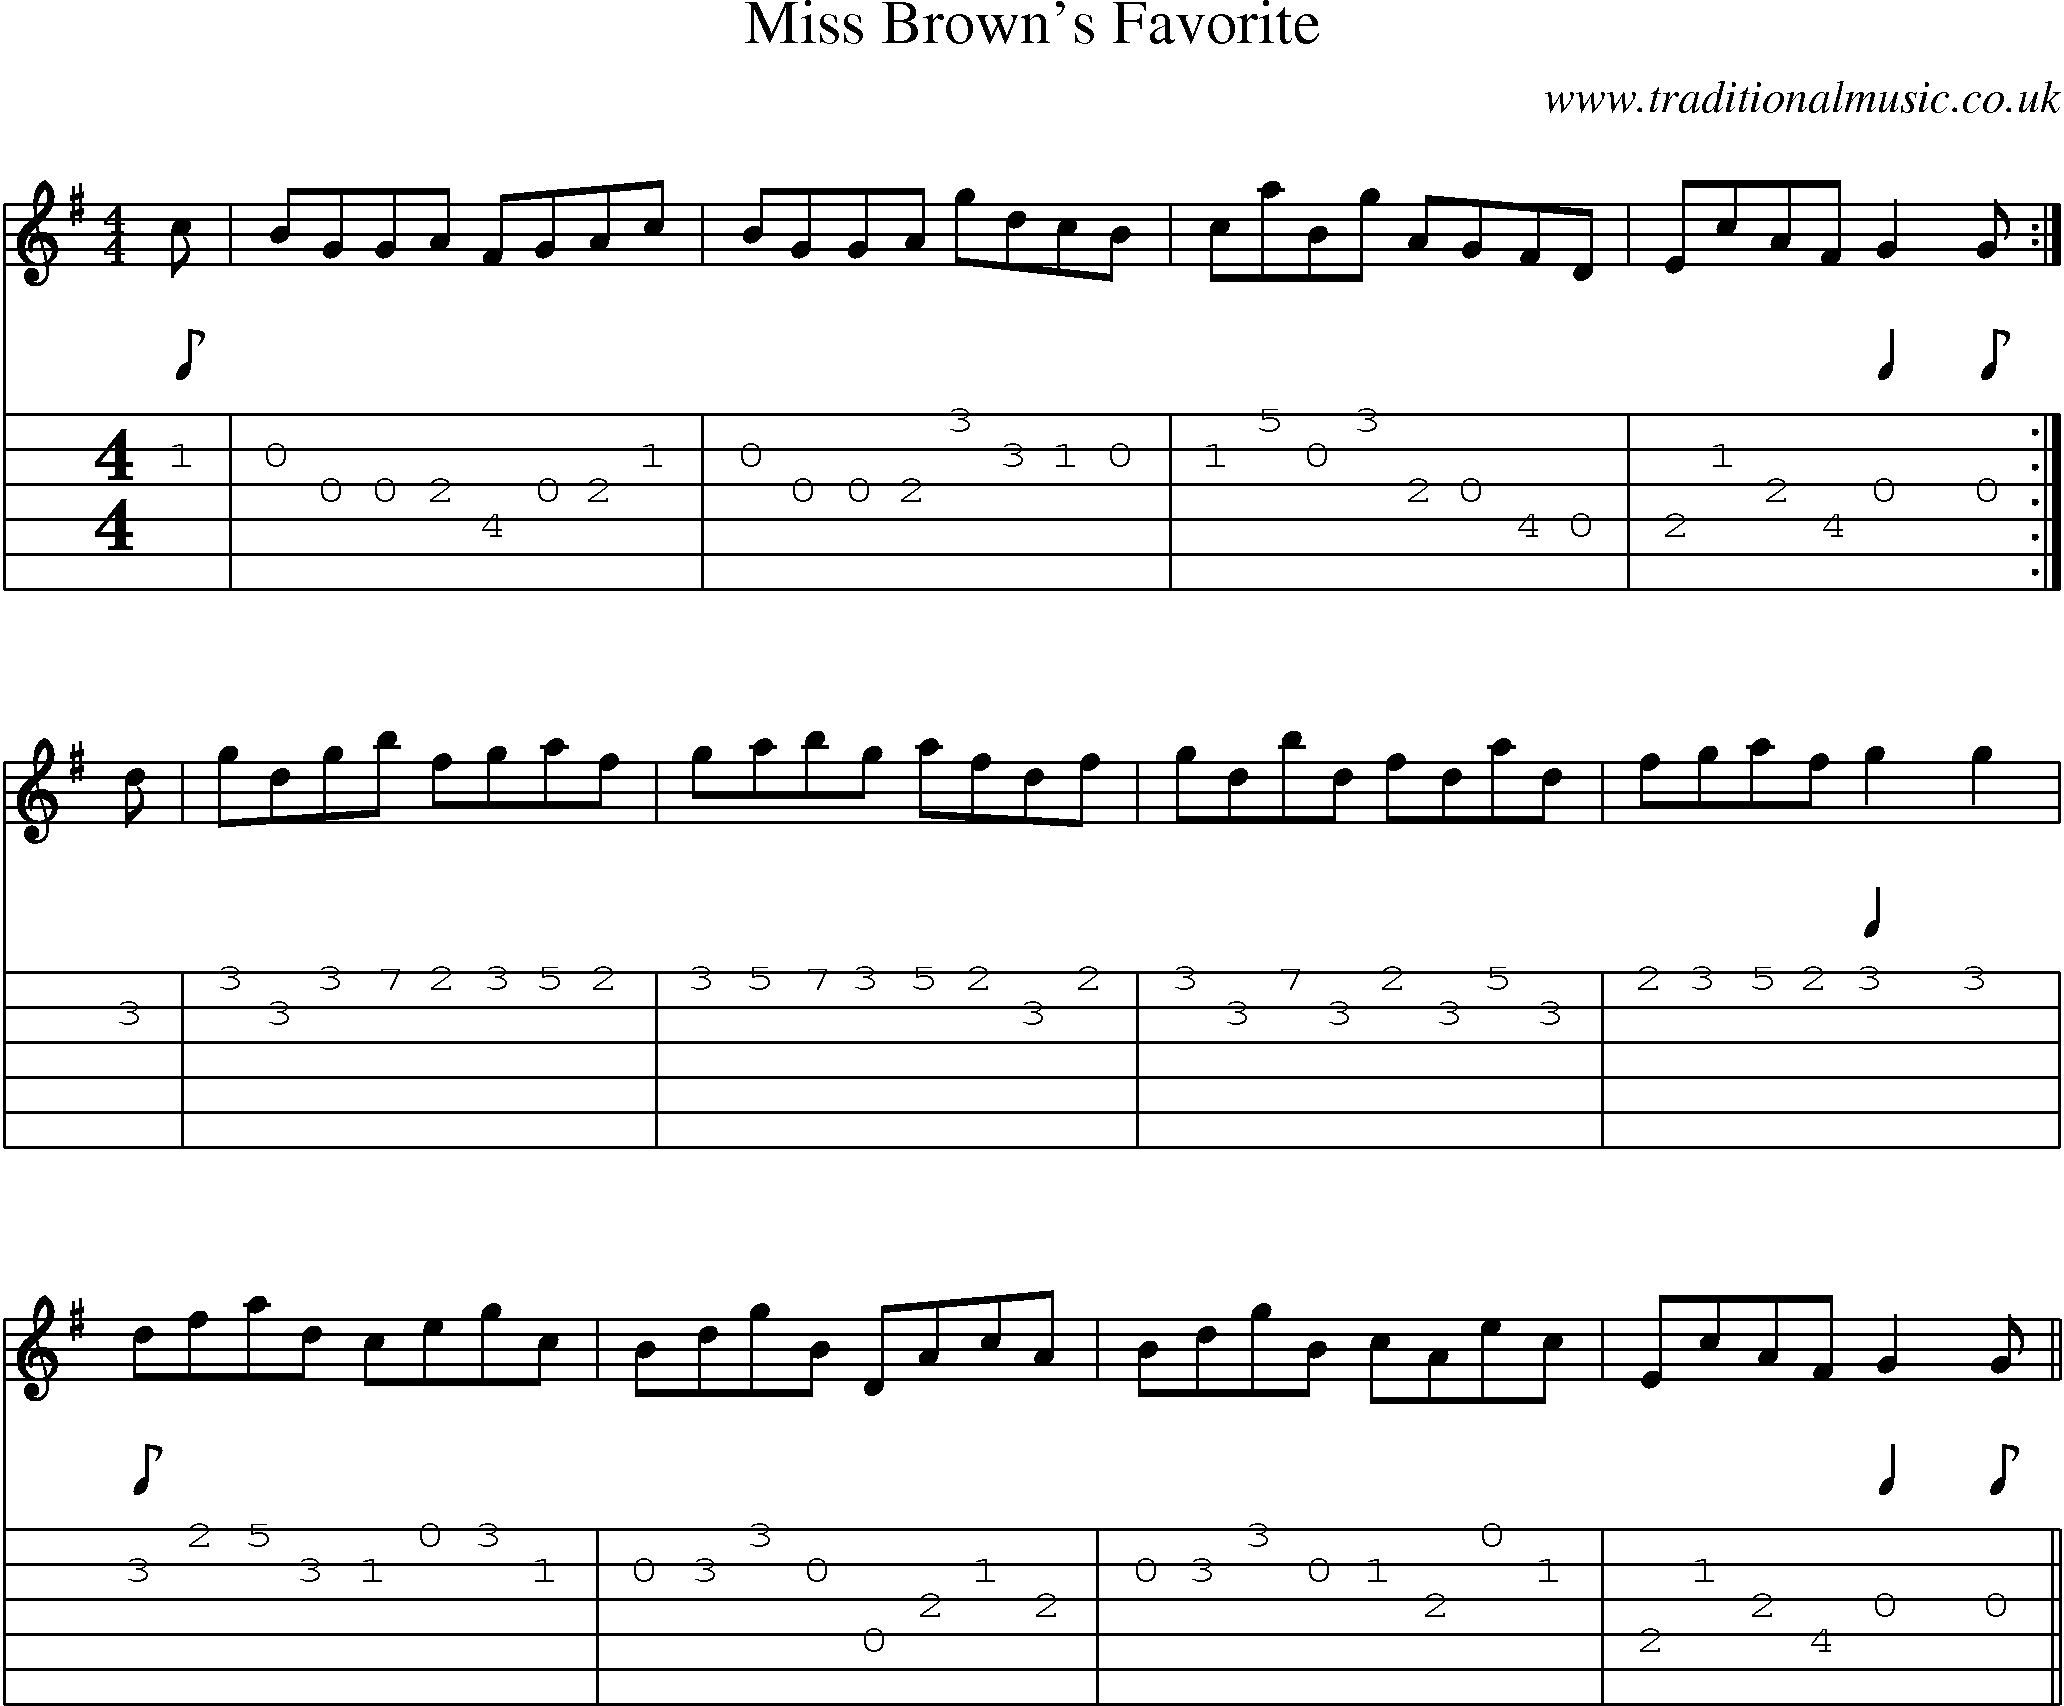 Music Score and Guitar Tabs for Miss Browns Favorite